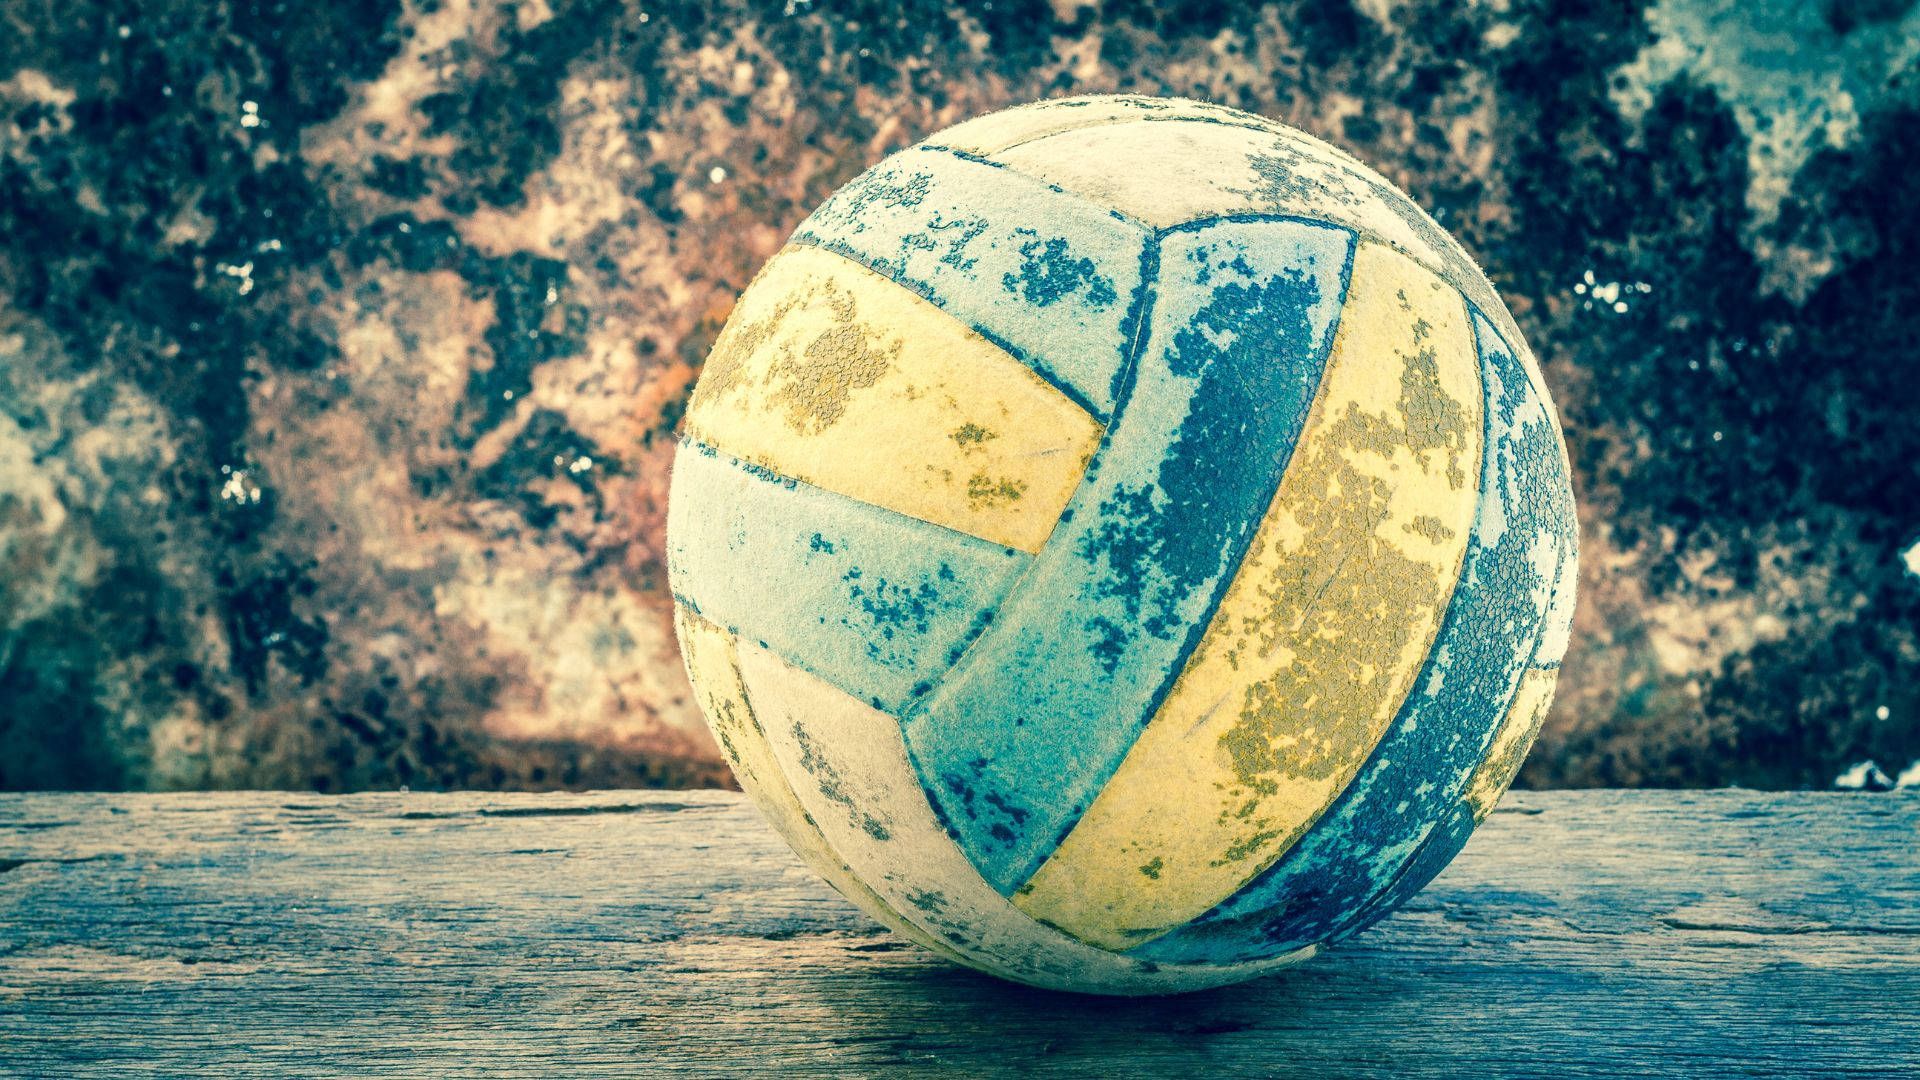 A blue and yellow ball sitting on the ground - Volleyball